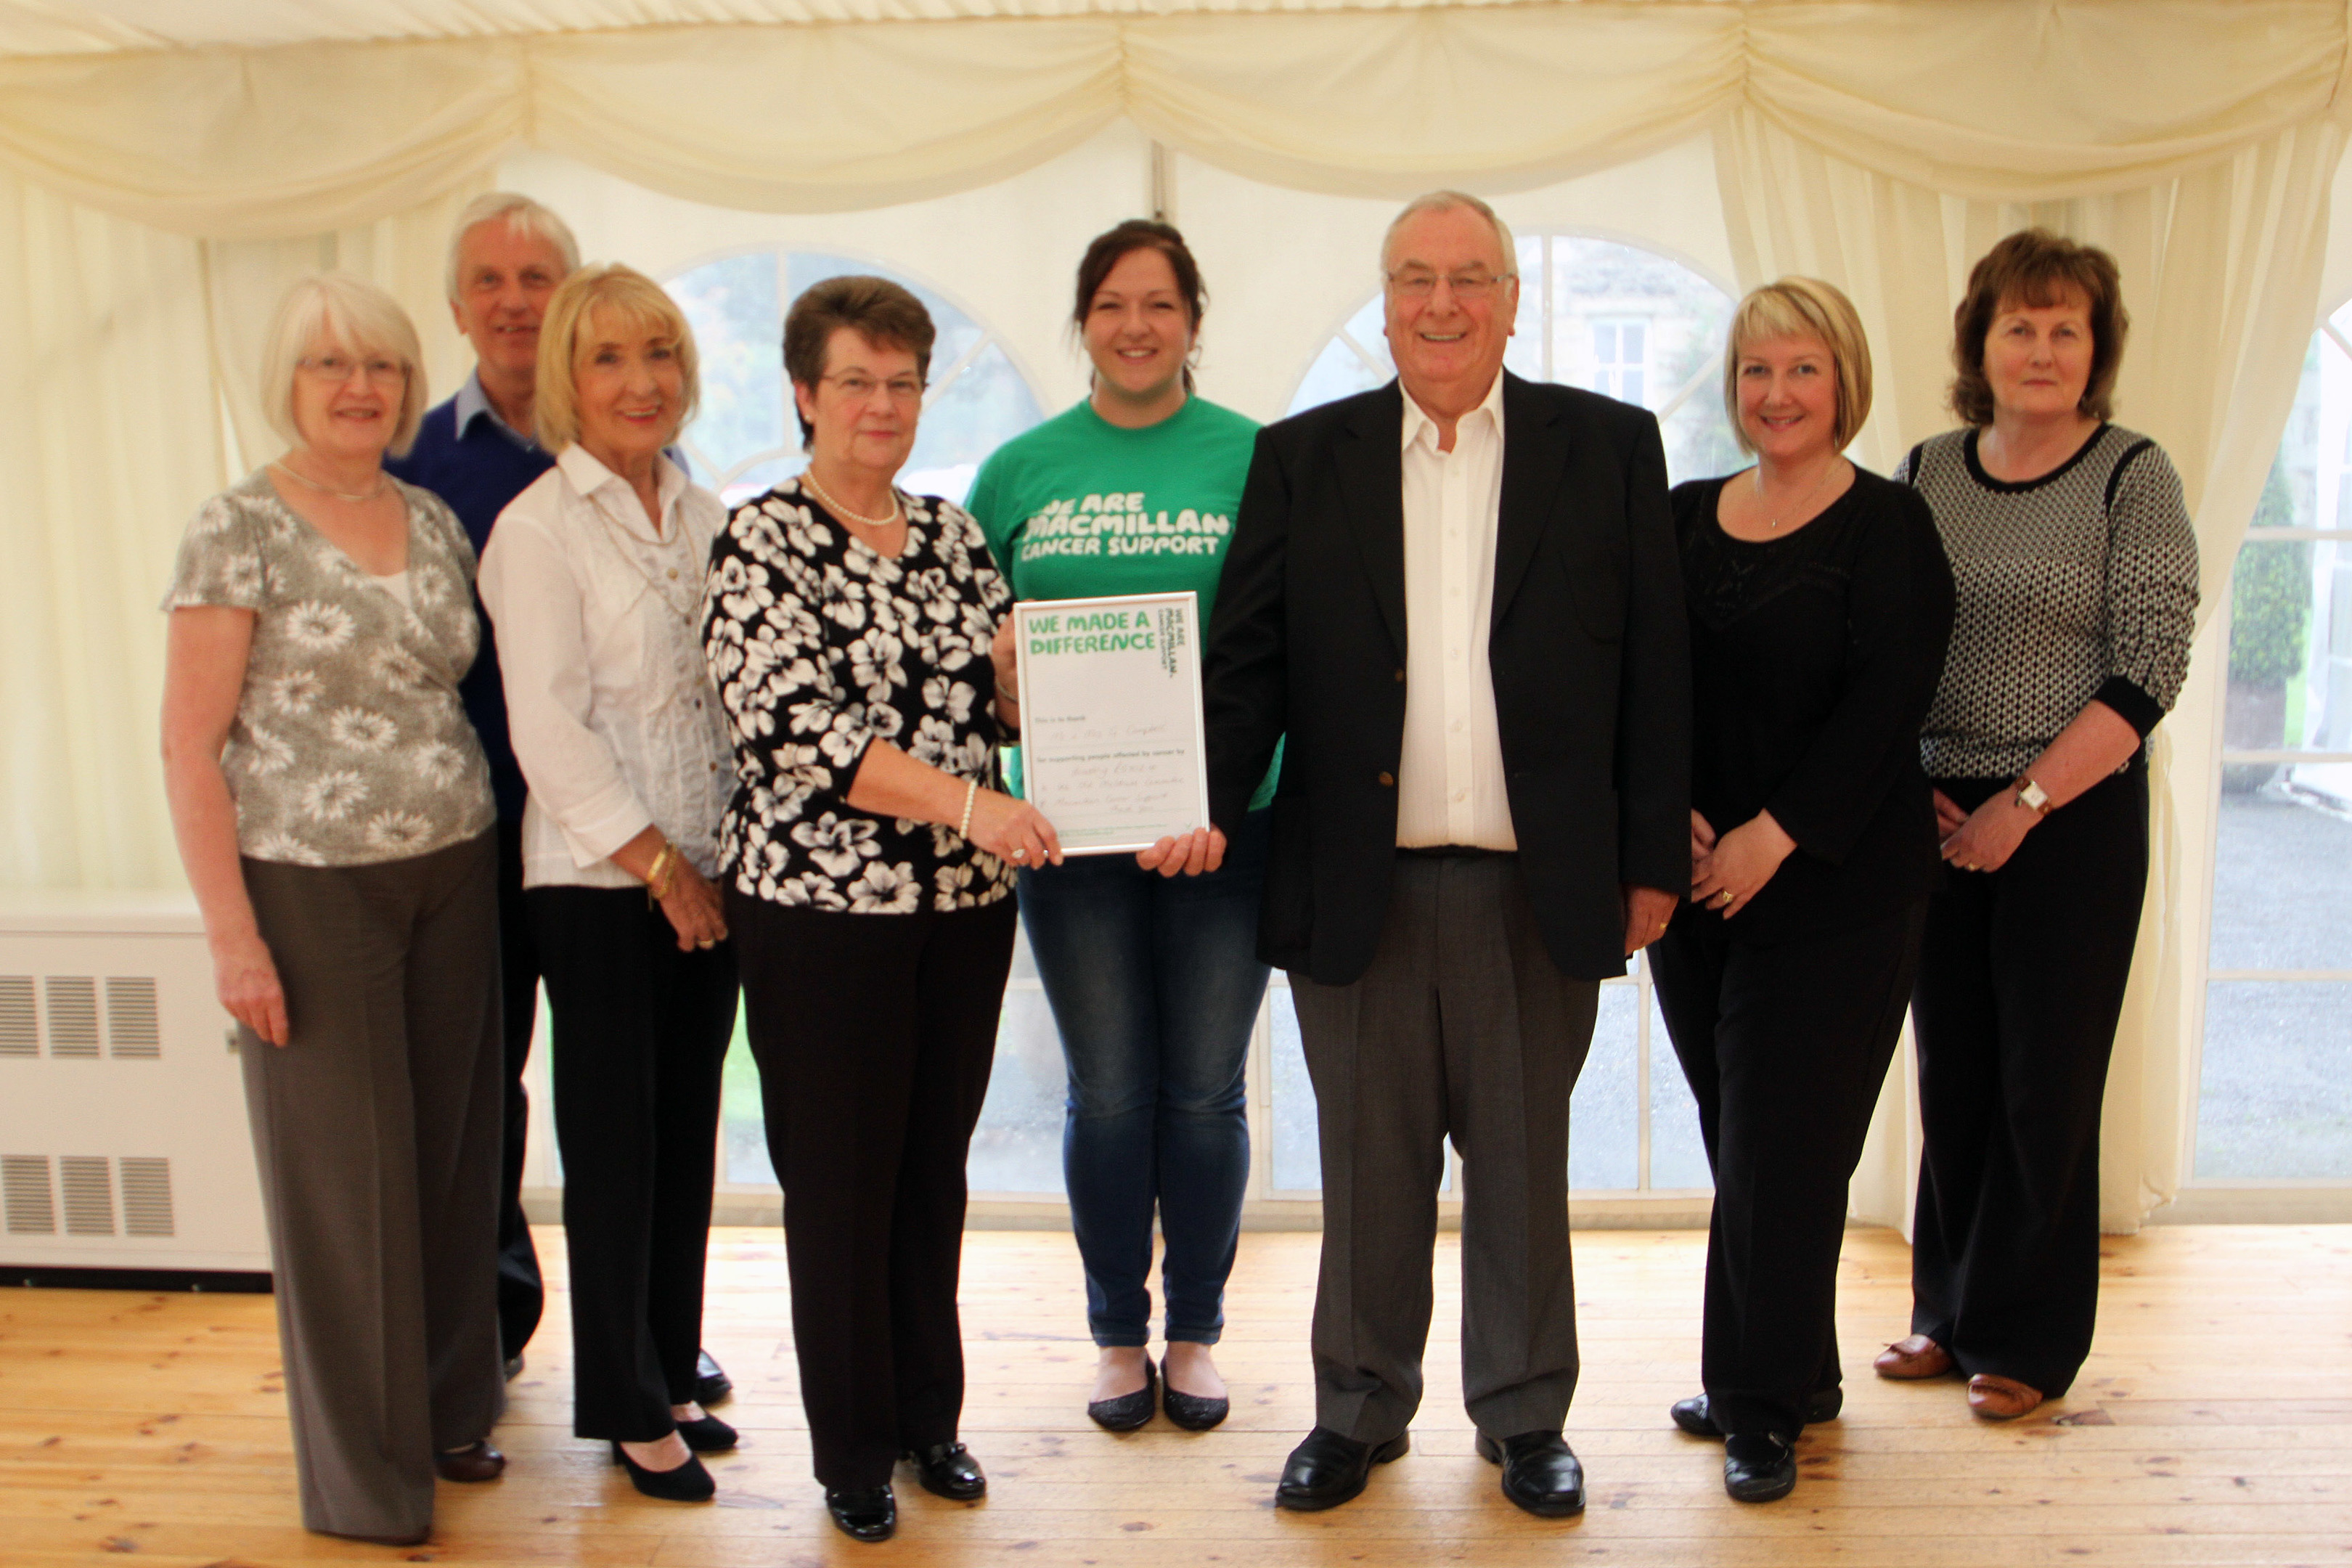 Meg and Gordon Campbell raised nearly £6,000 for Macmillan Cancer Support at their golden wedding anniversary party